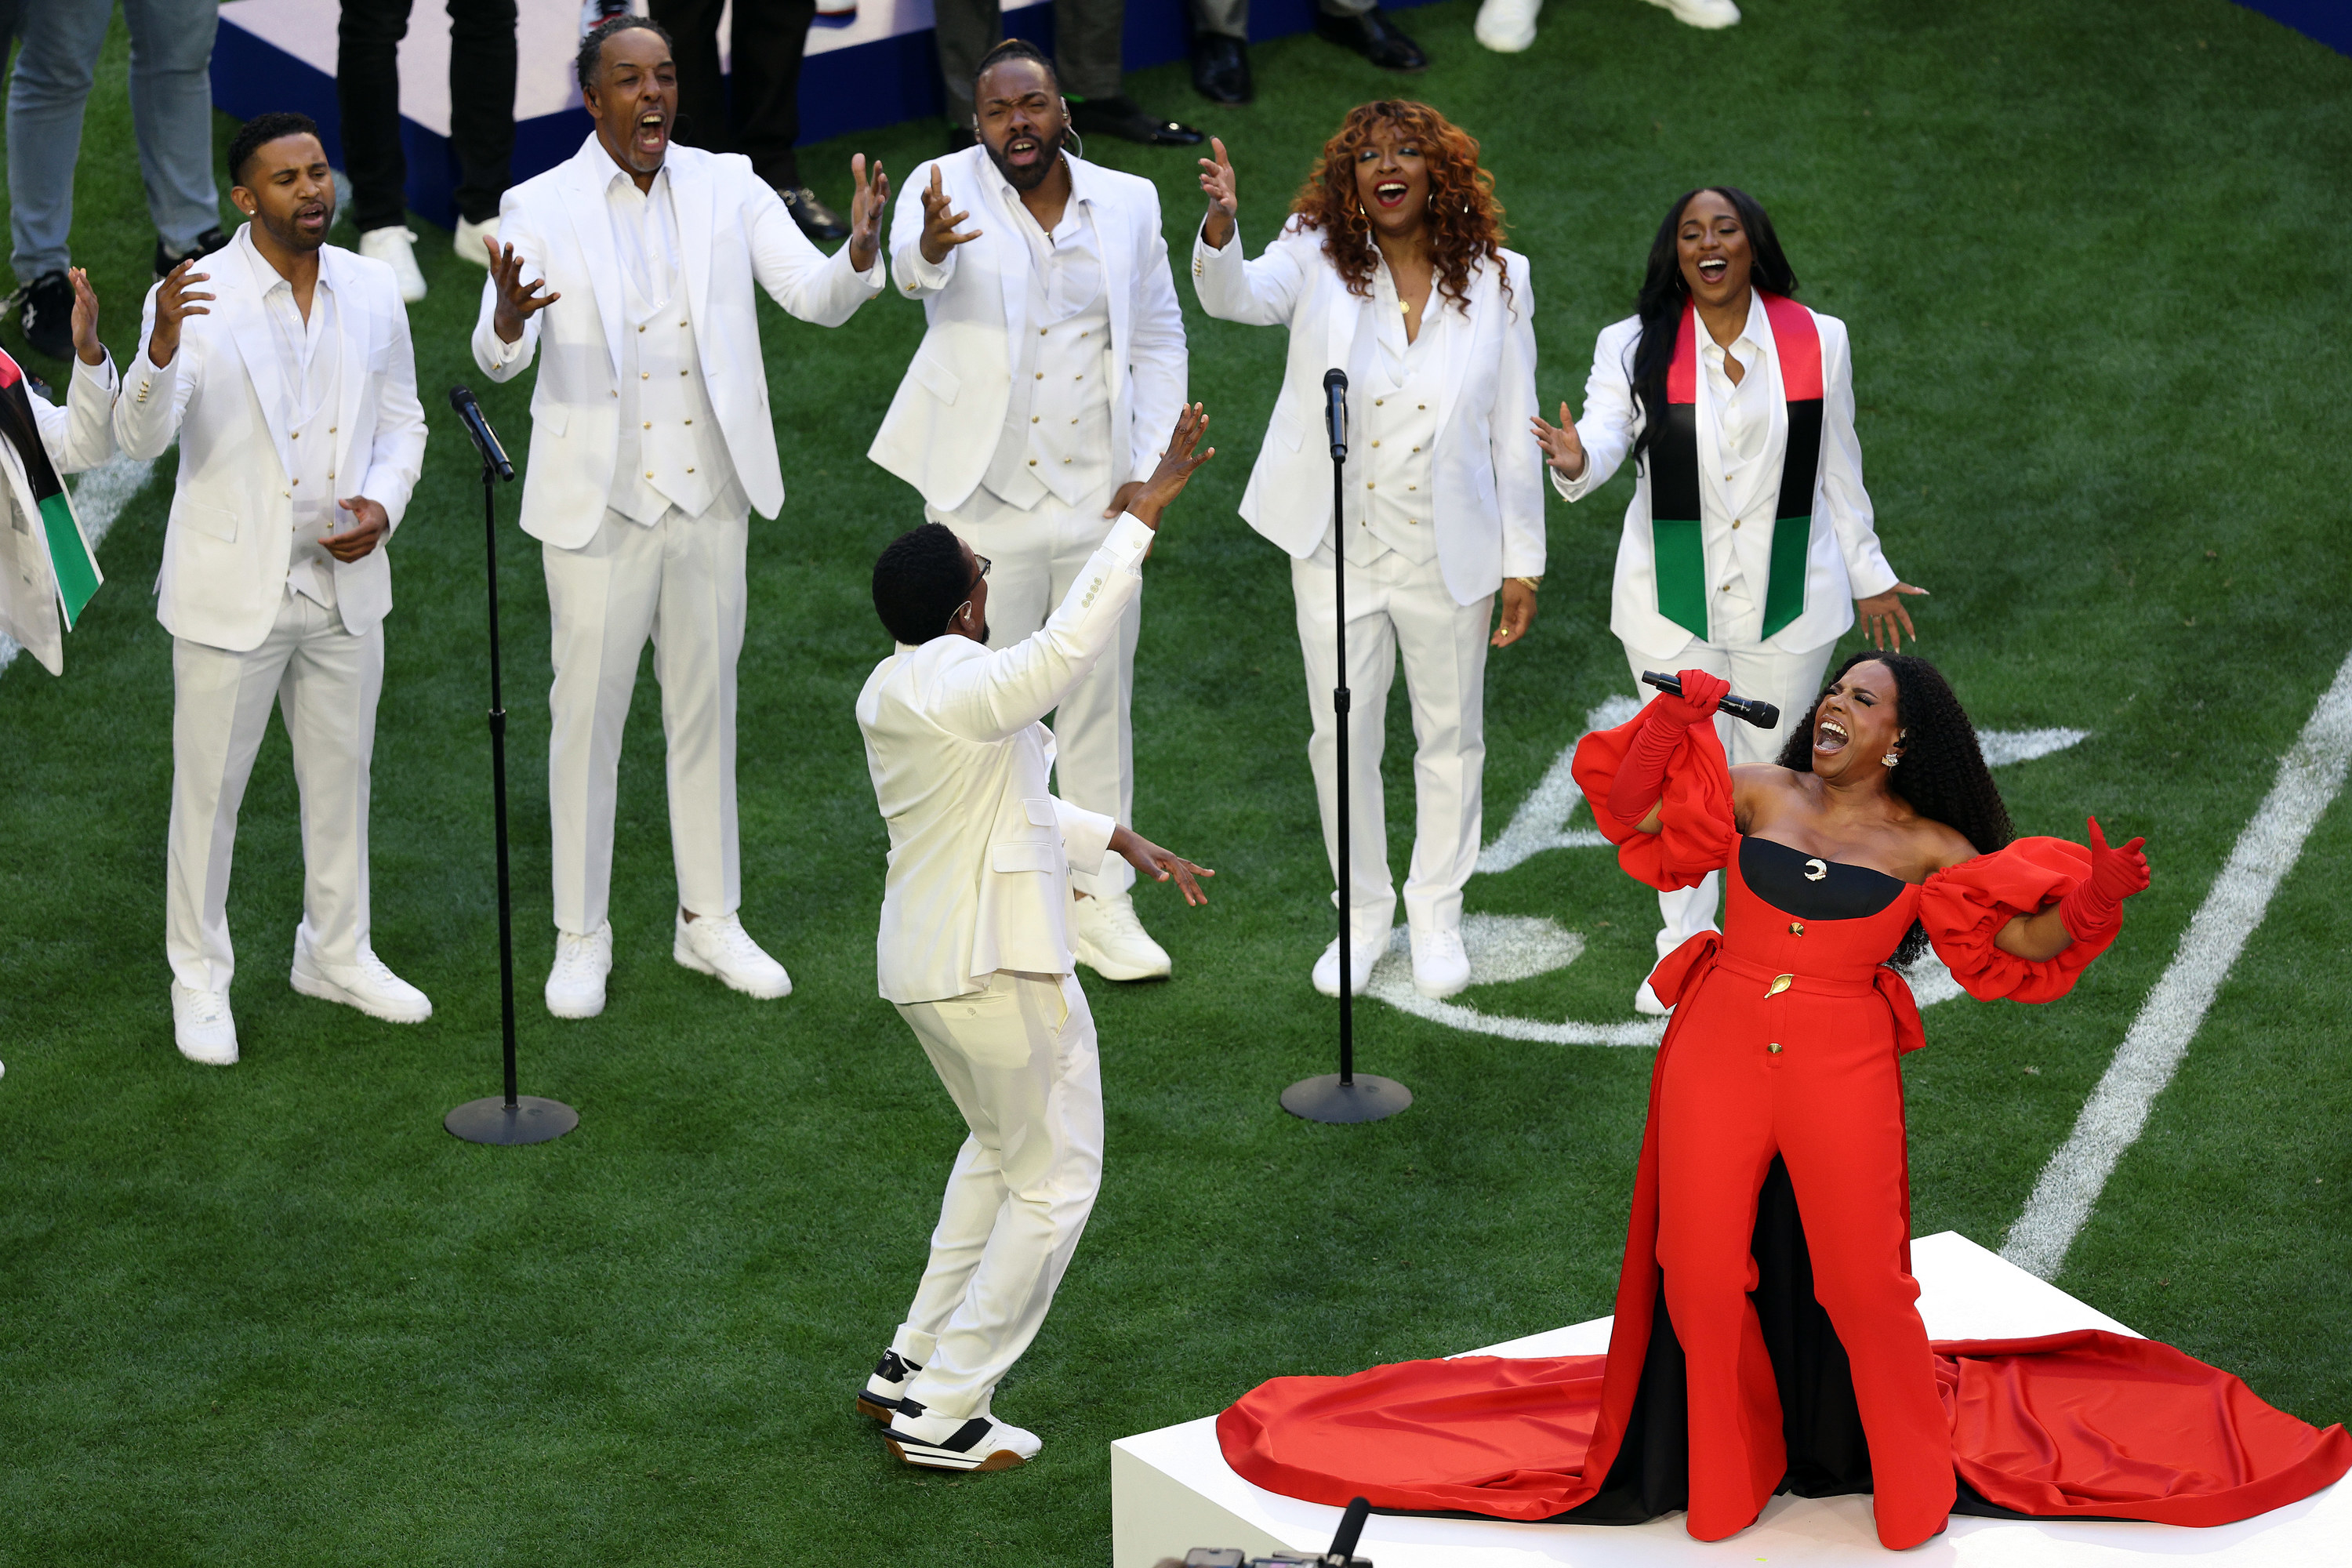 Sheryl performing on a platform on the football field in a pantsuit with flowy sleeves and long train with backup singers behind her